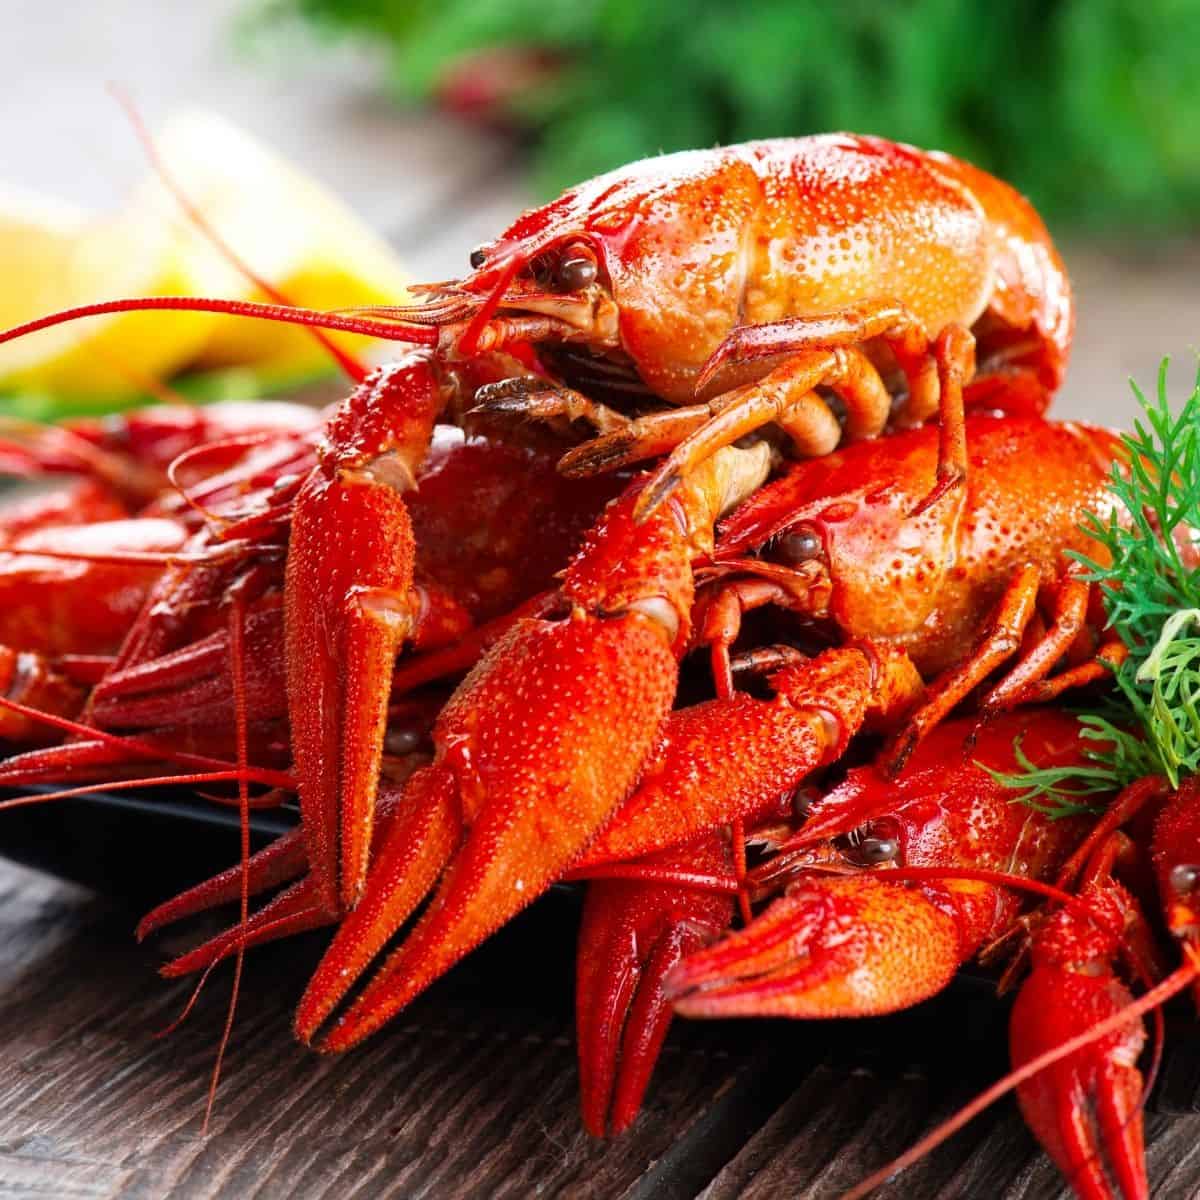 How To Tell If Crawfish Is Bad: A Guide For Storage, Freezing & More